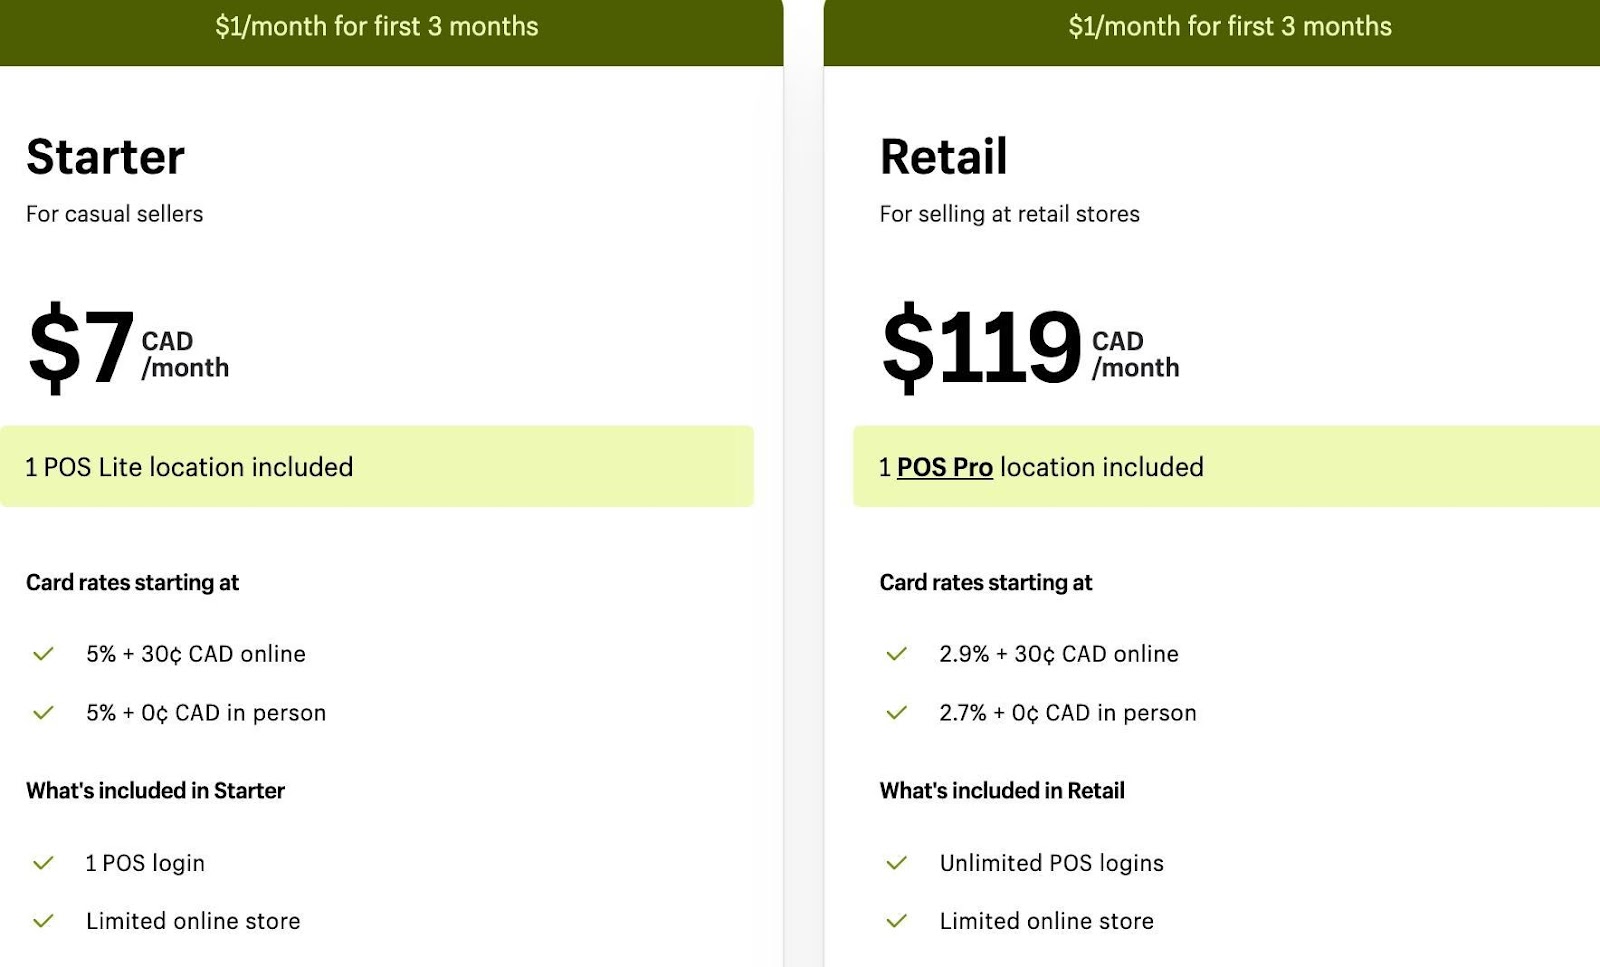 Comparing Costs: Shopify POS Lite vs. Shopify POS Pro